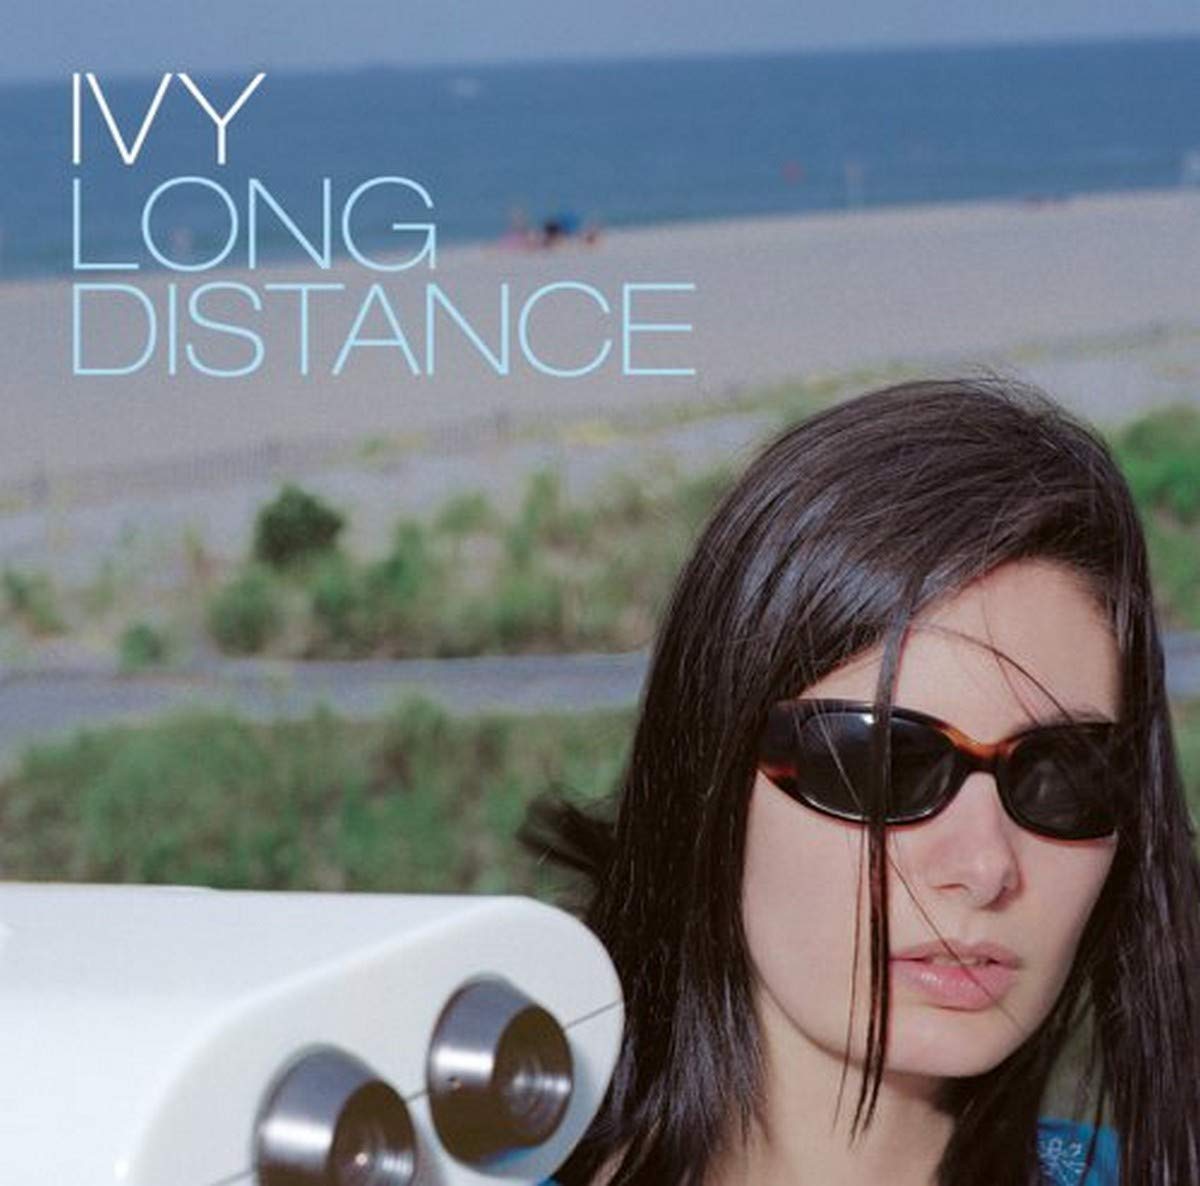 Ivy Released "Long Distance" 20 Years Ago Today Magazine